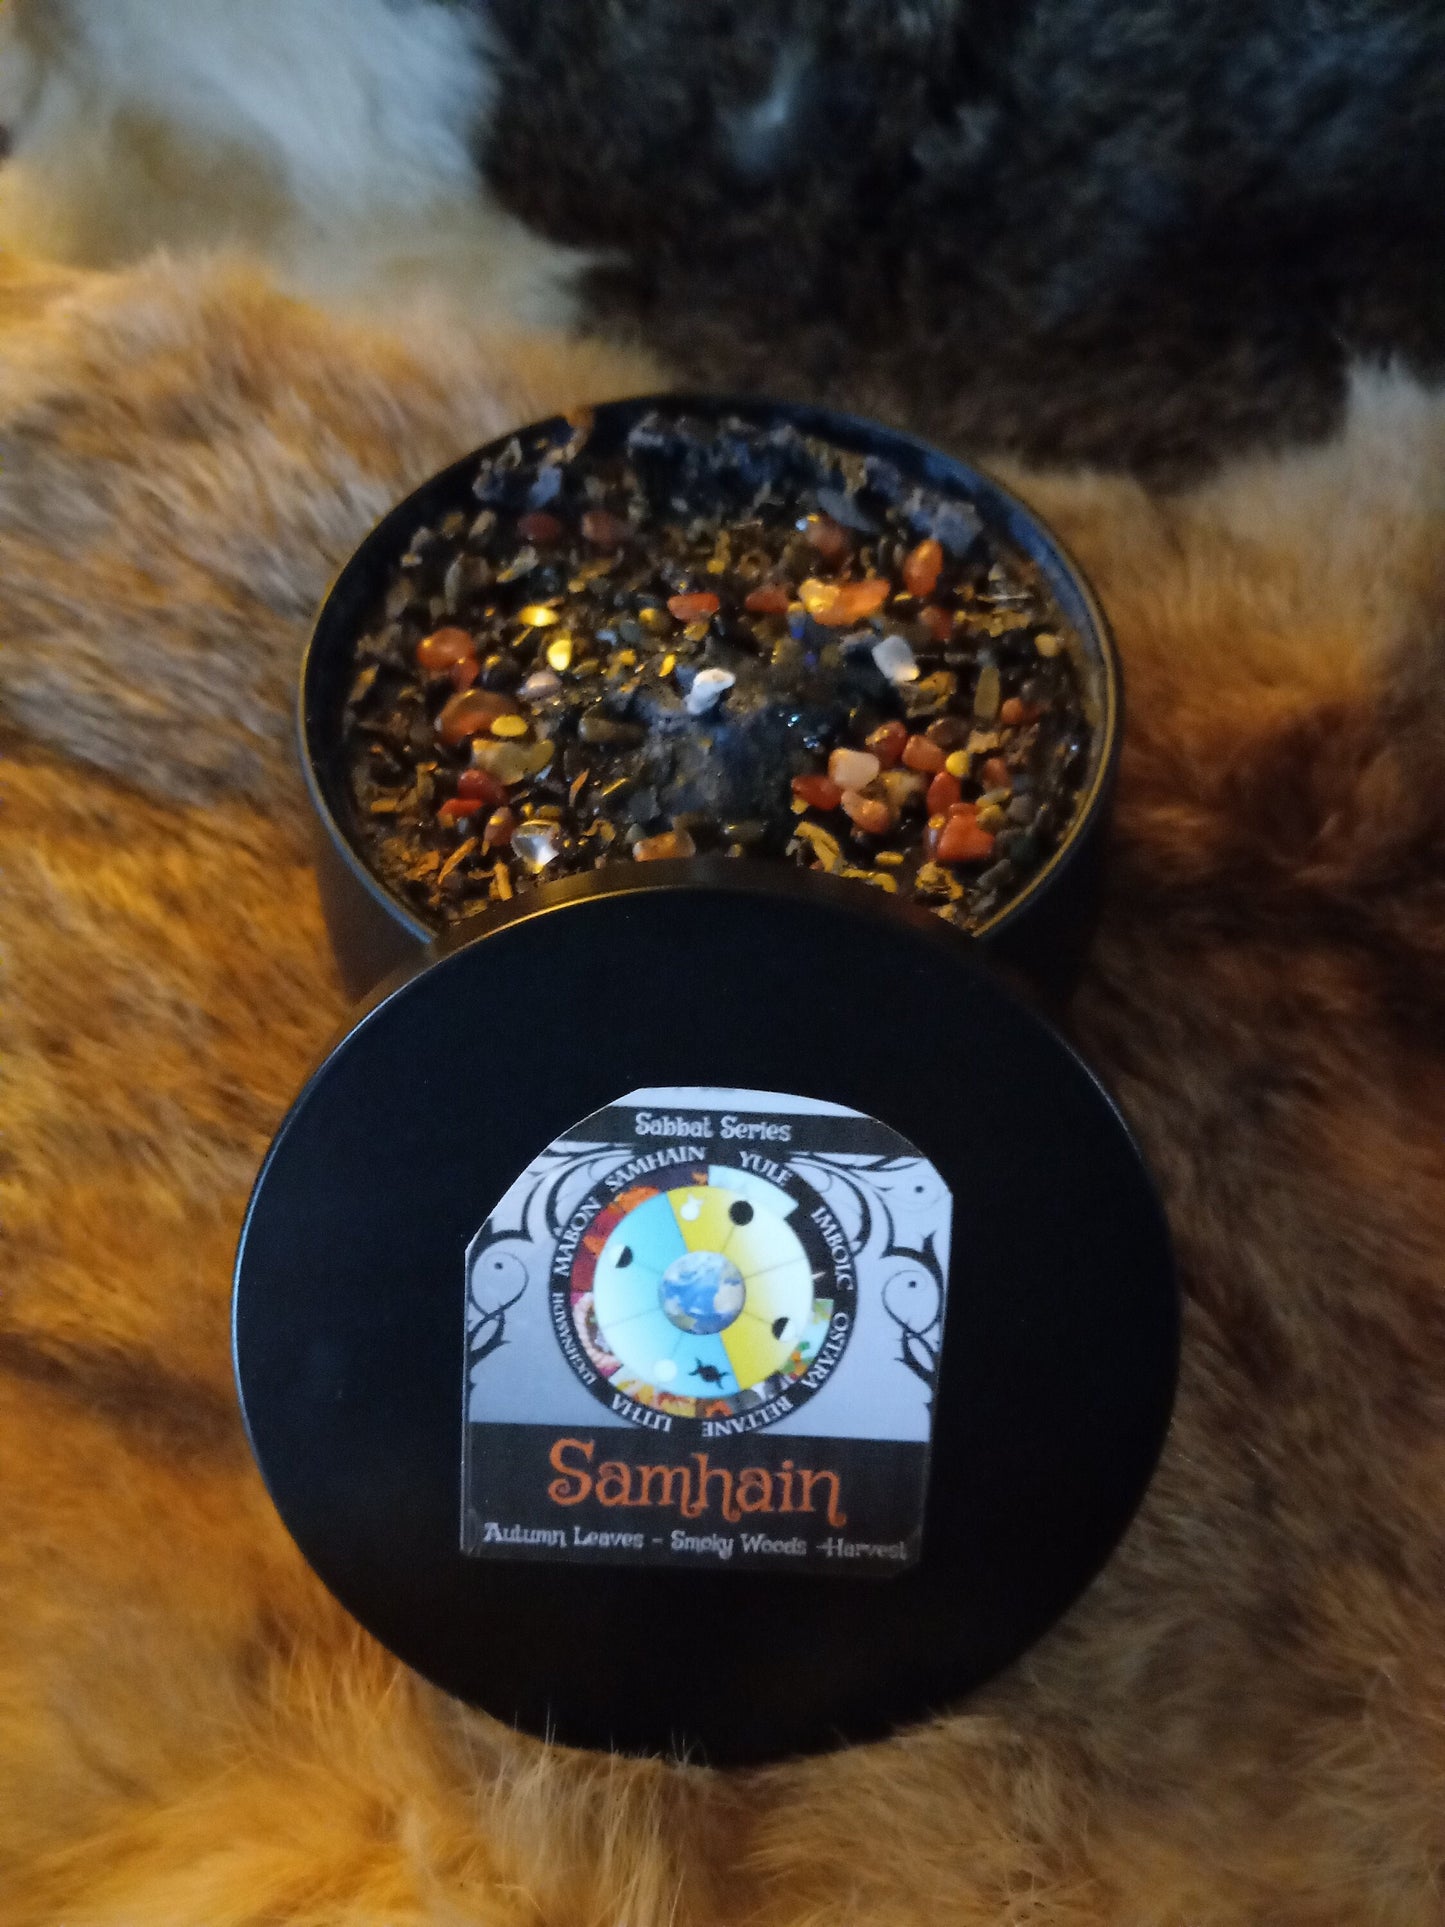 SAMHAIN Sabbat Candle Tins or Wax Melts with Black Obsidian and Calendula Petals Black Soy Candle Tarts Highly Scented - Pagan Wiccan Wicca